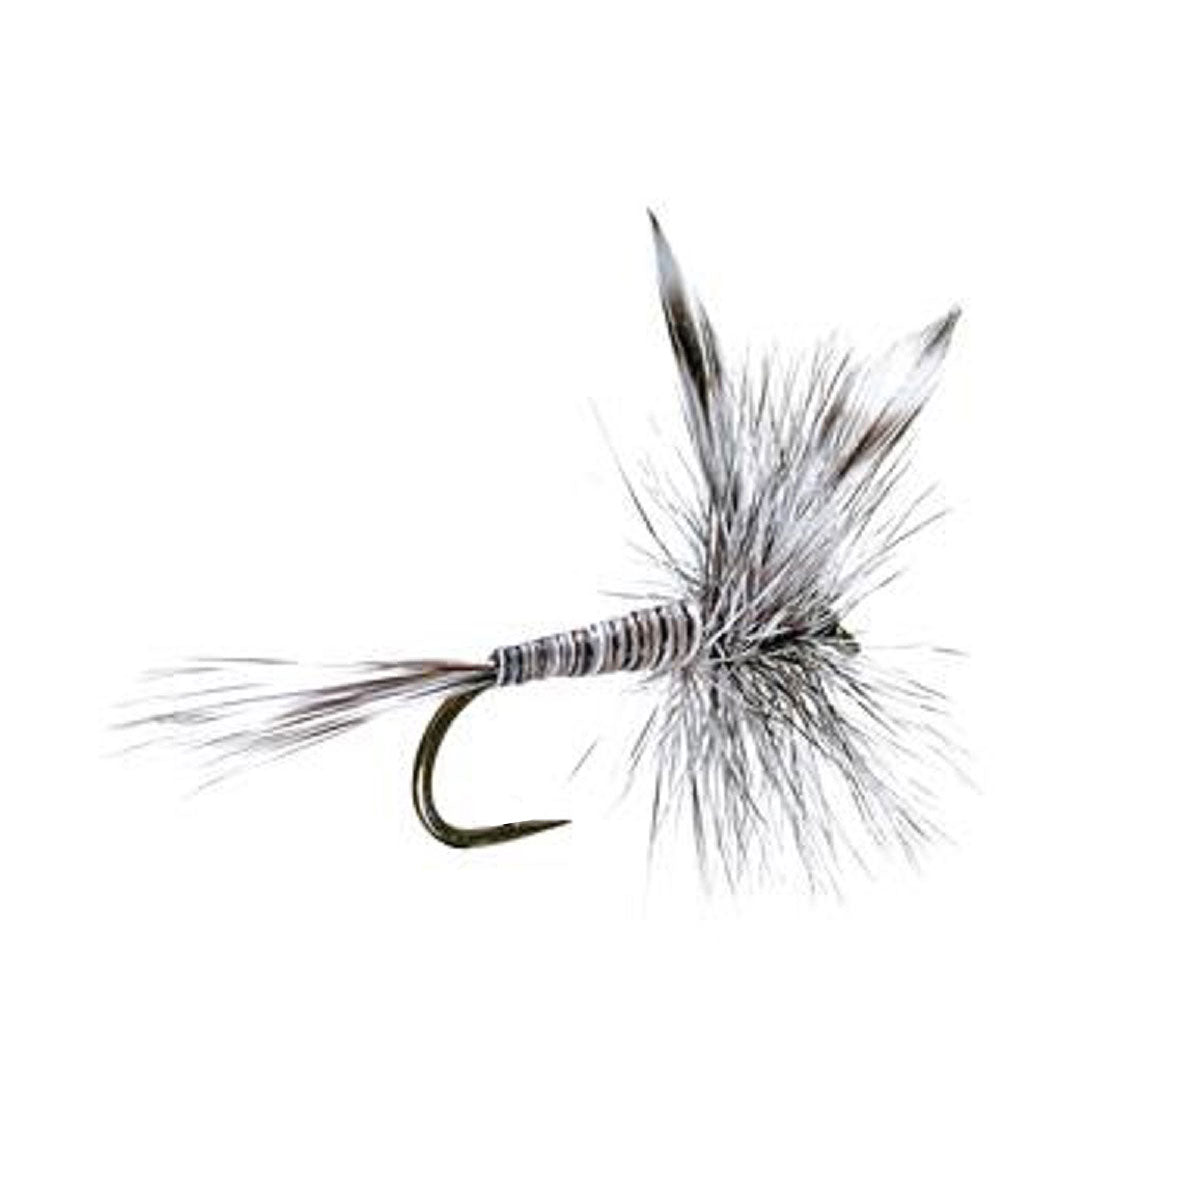 Barbless Mosquito Classic Trout Dry Fly Fishing 1 Dozen Flies - Hook Size 14